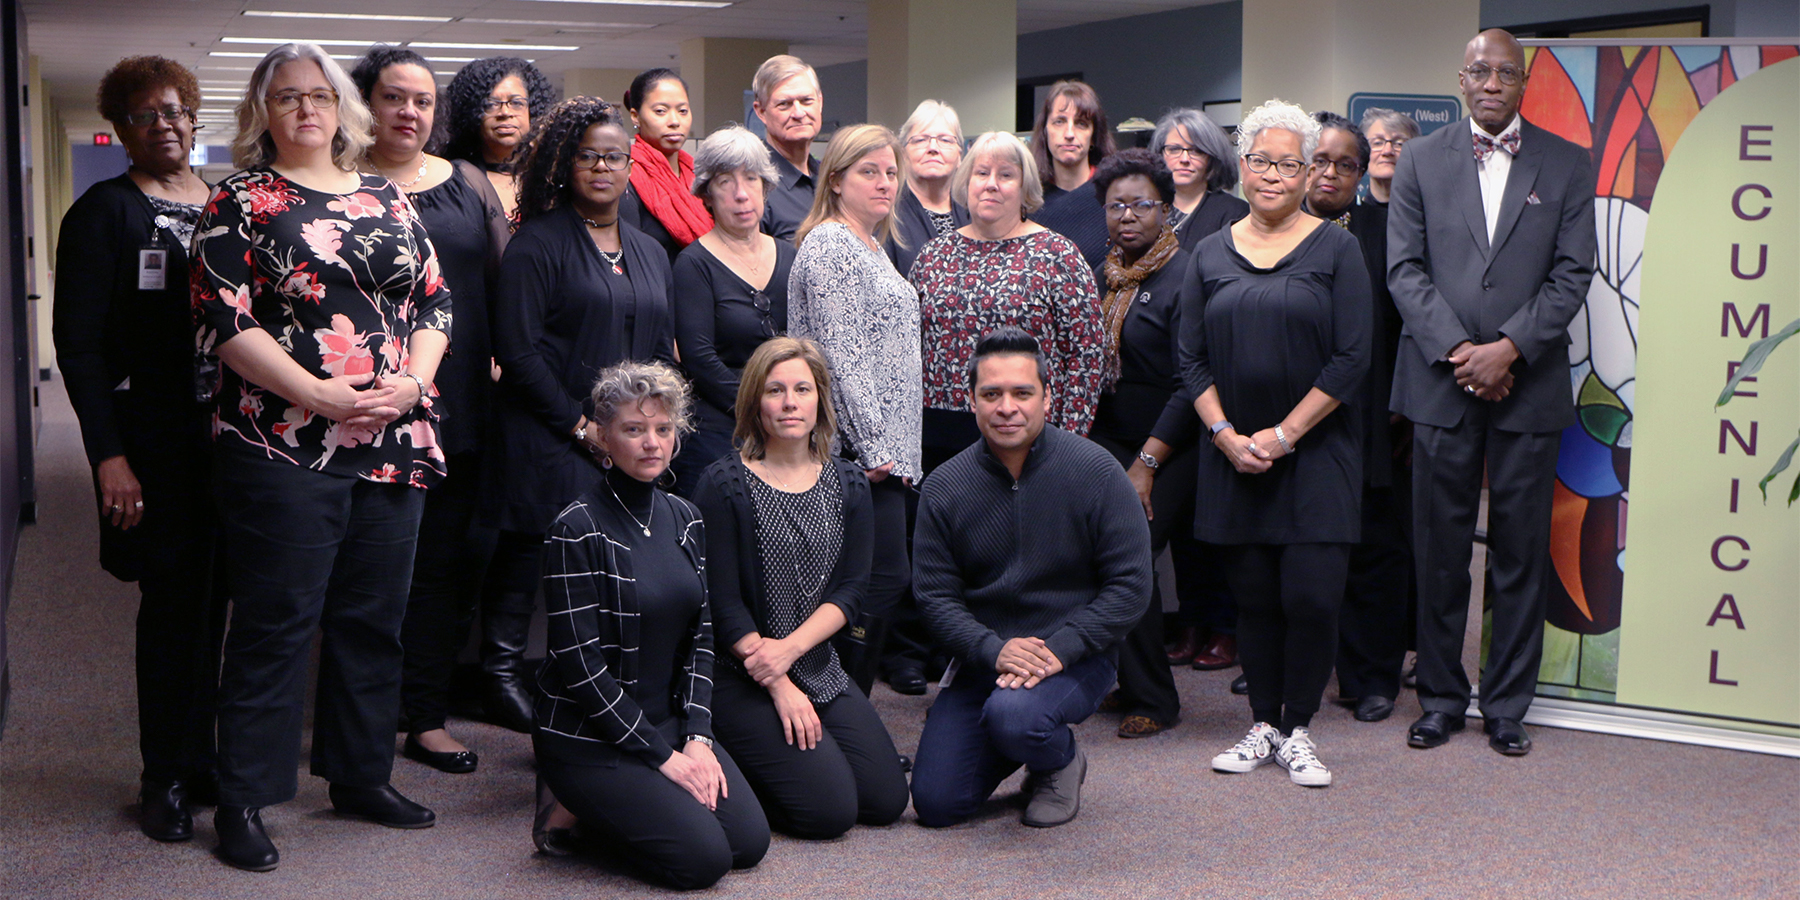 Office of the General Assembly staff dress in black to commemorate the “Thursdays in Black Campaign” to raise awareness of the abuse of women. Photo by Randy Hobson.